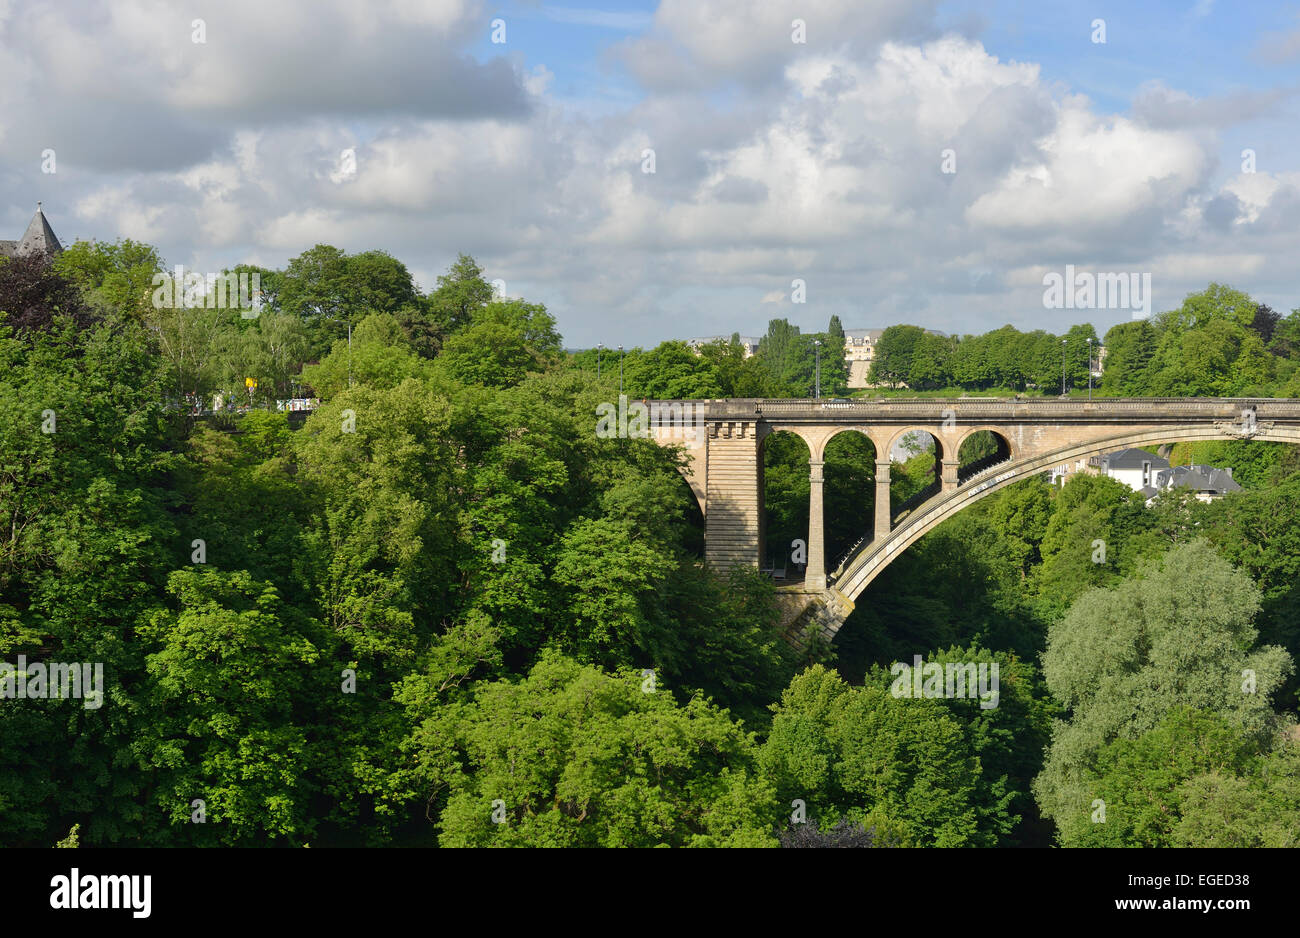 Adolphe bridge spanning the Petrusse valley, Luxembourg City, Luxembourg Stock Photo